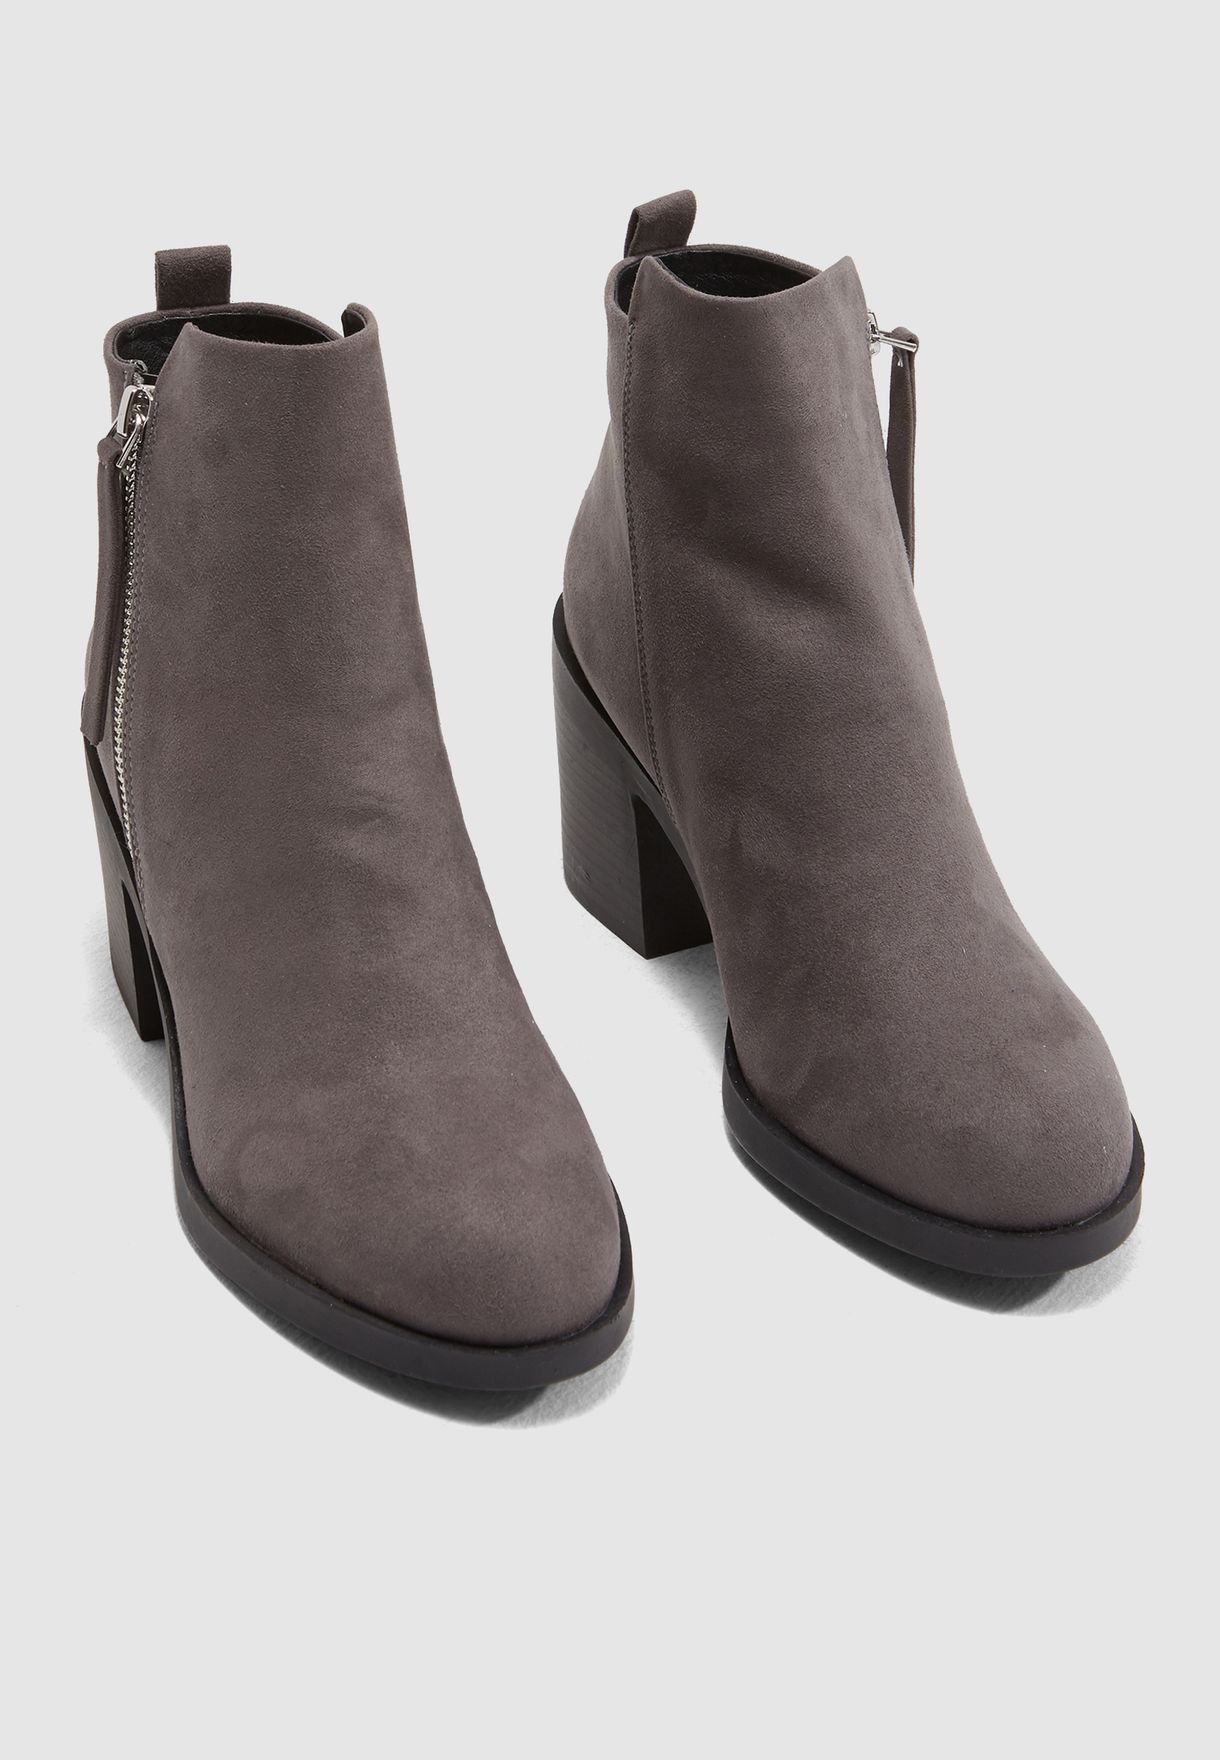 brittney ankle boots topshop